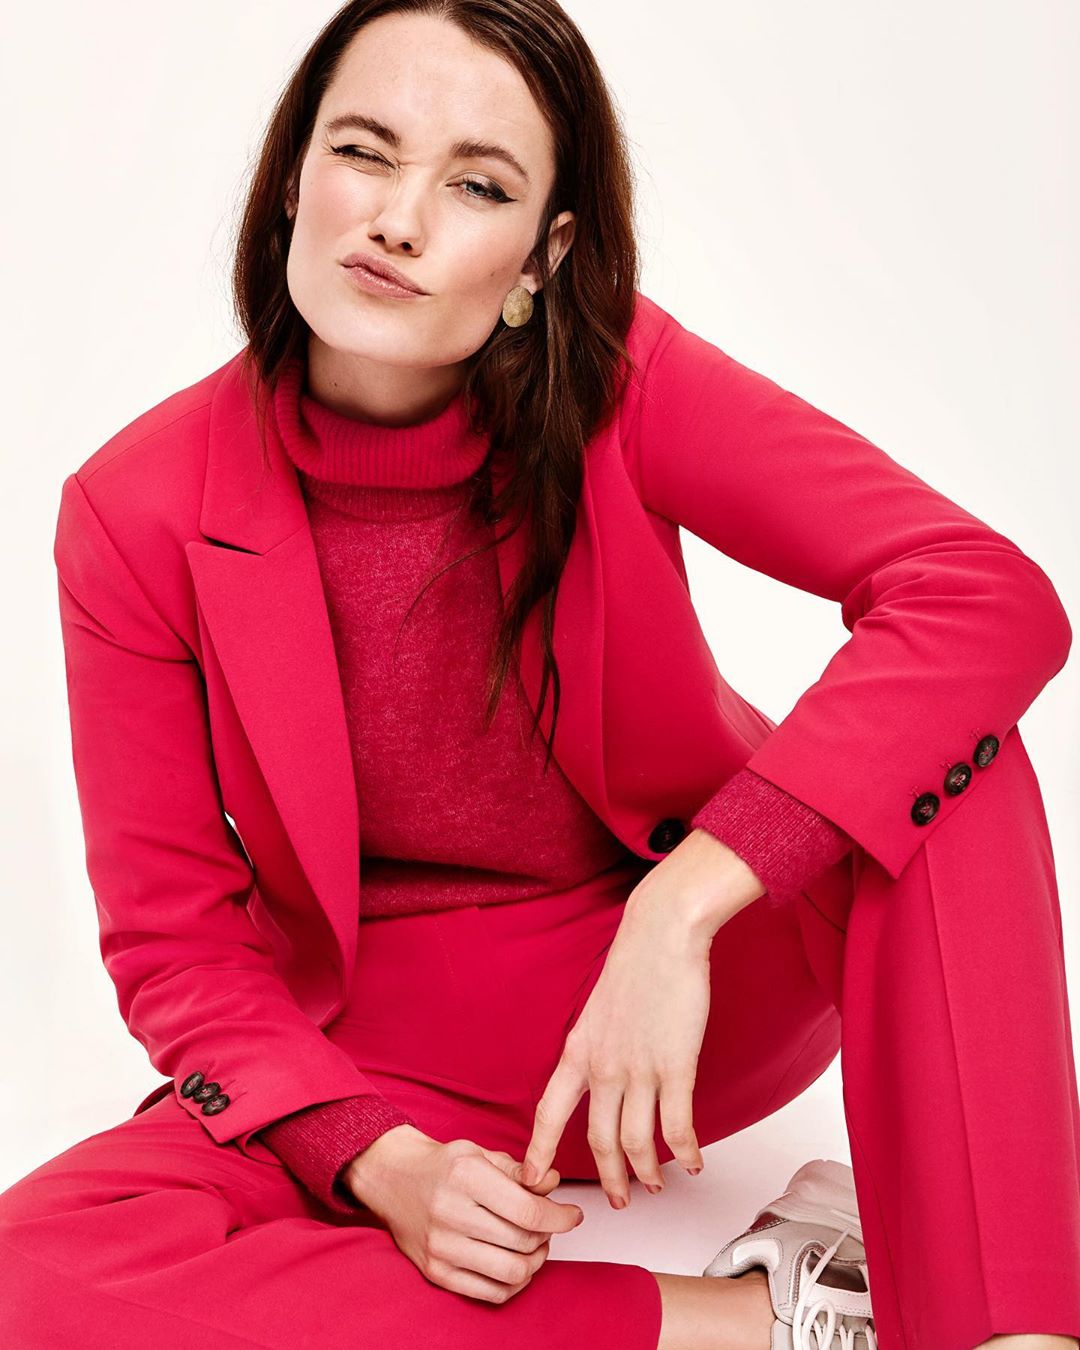 ＢＥＡＵＭＯＮＴ - Beaumont suits you🤍 hot in pink! #happyfriday #weekendvibes #beaumontxdechene #beaumont #suits #fallwinter20 #suitsonyou #newcollection #beaumontbeauties #BB #inourstore #linkinbio